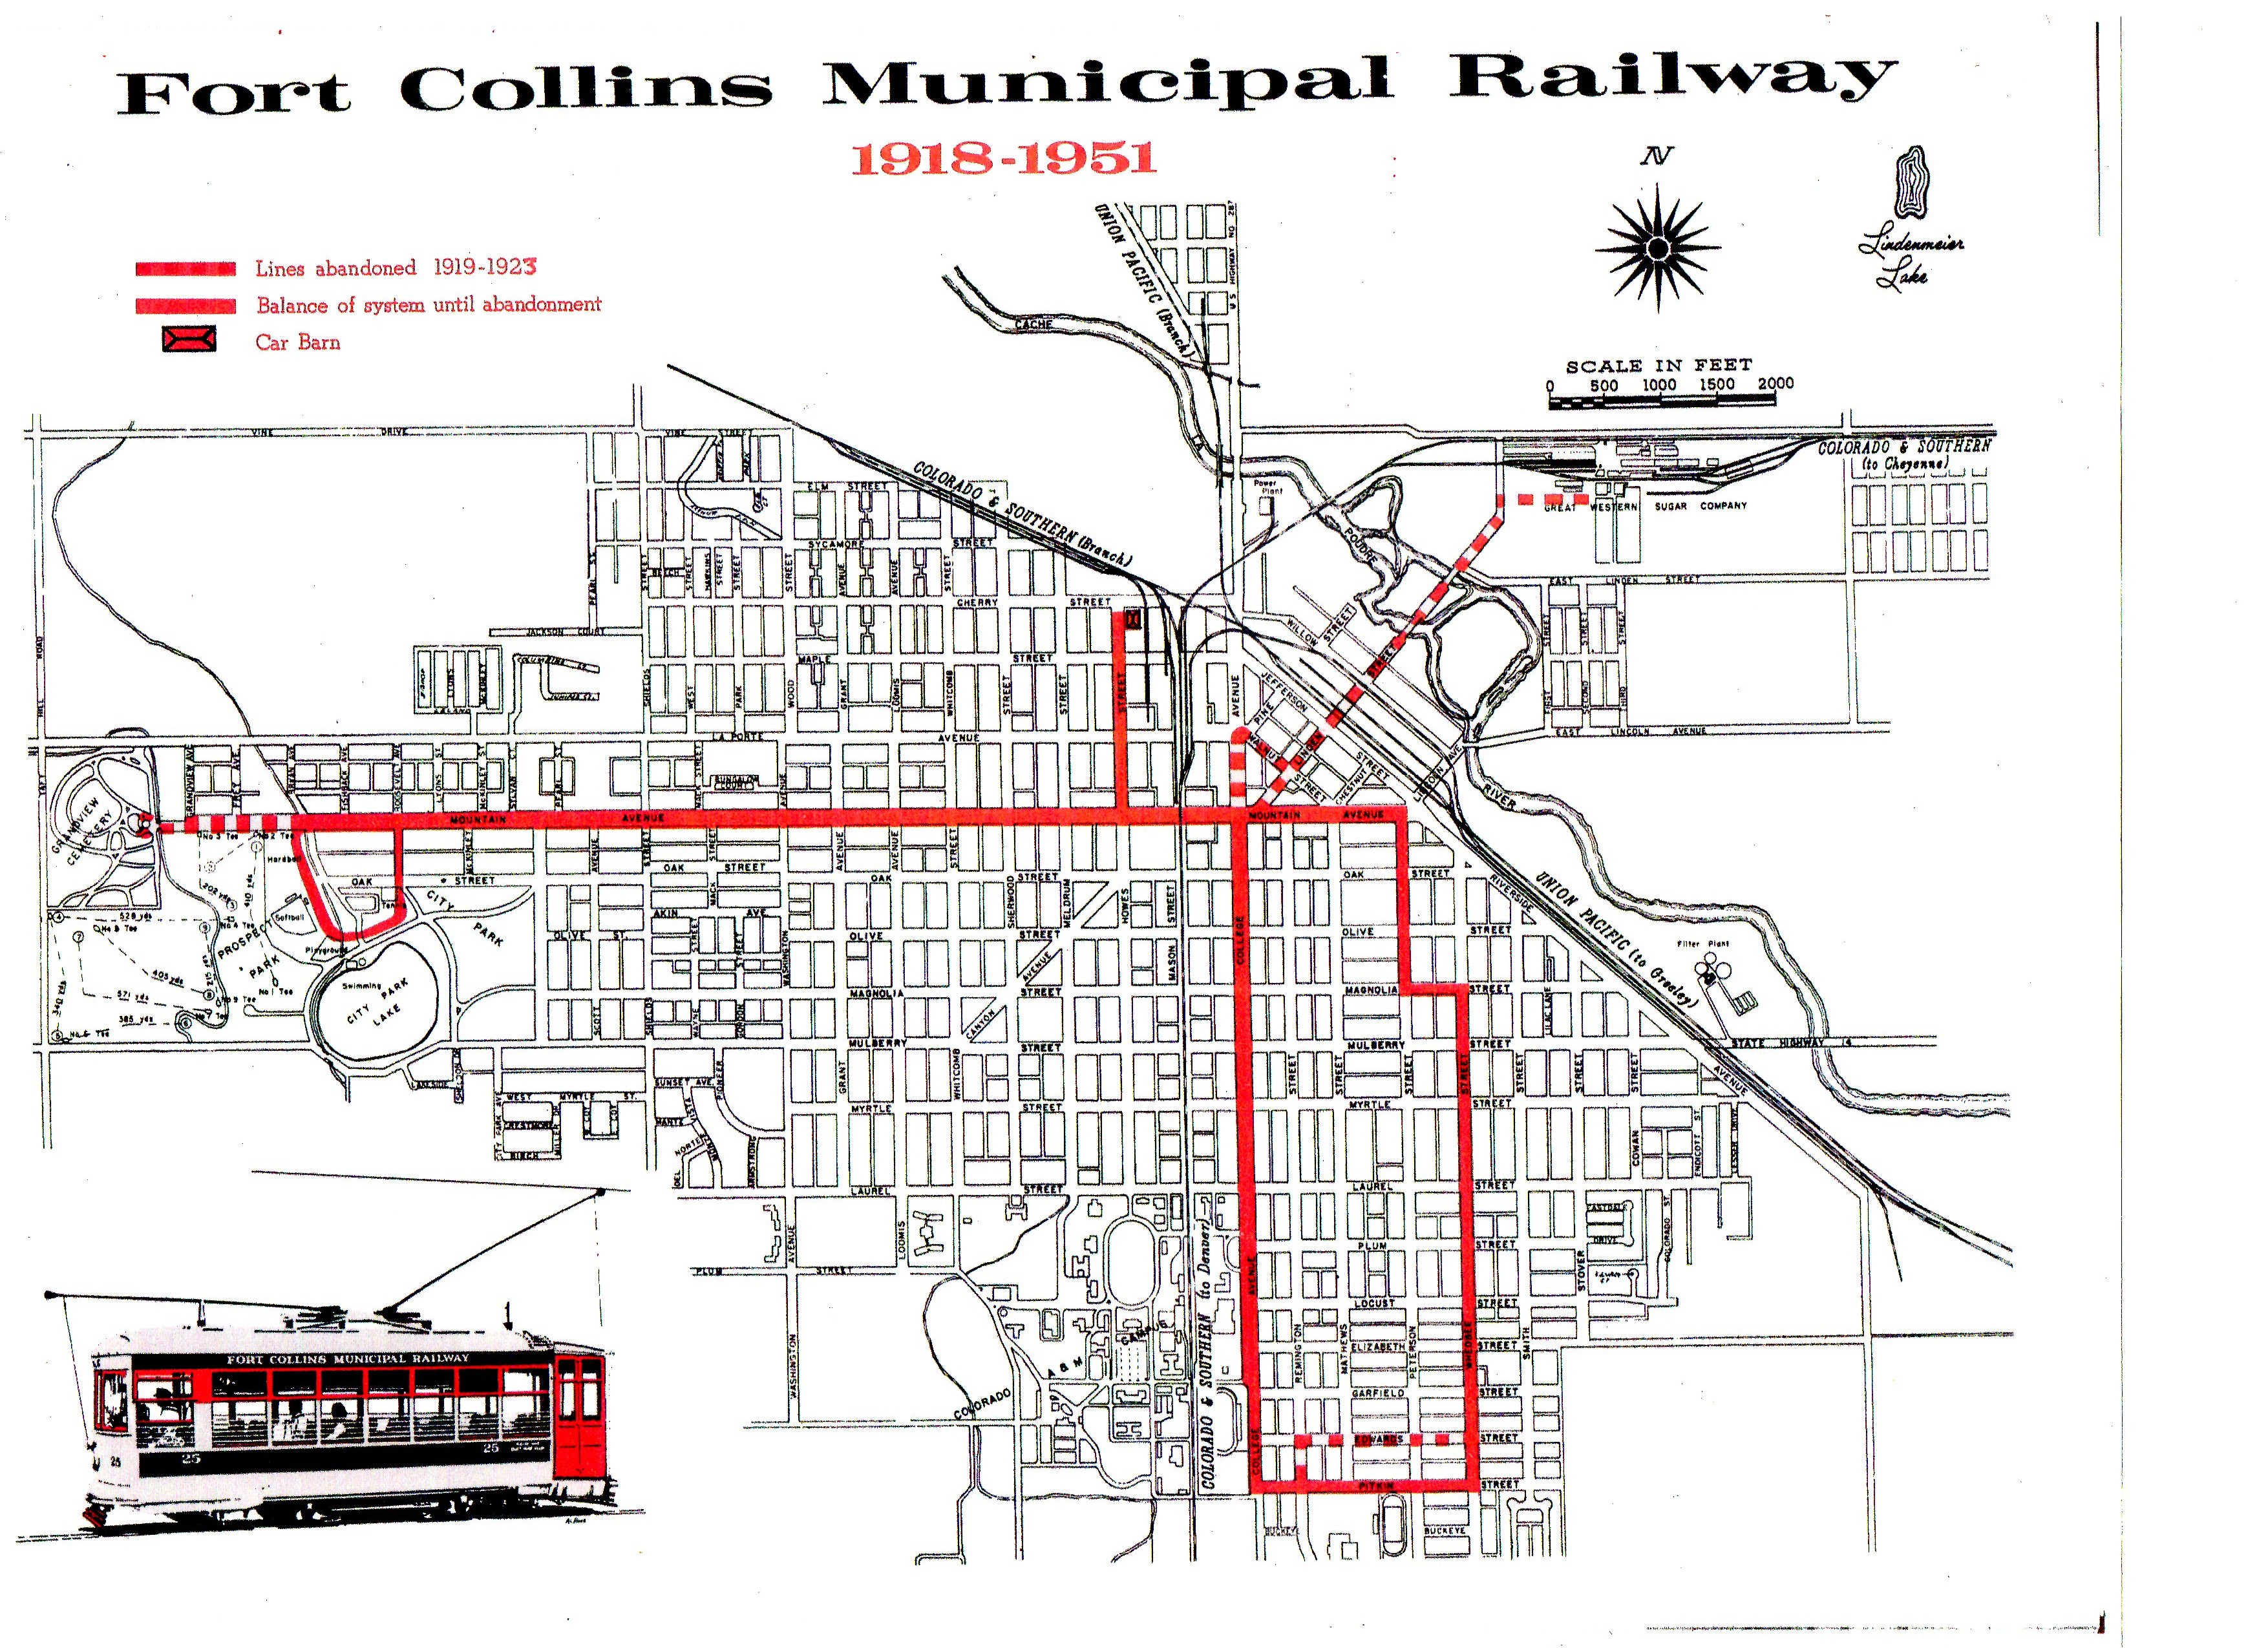 map of Fort Collins' trolley lines 1918-1951